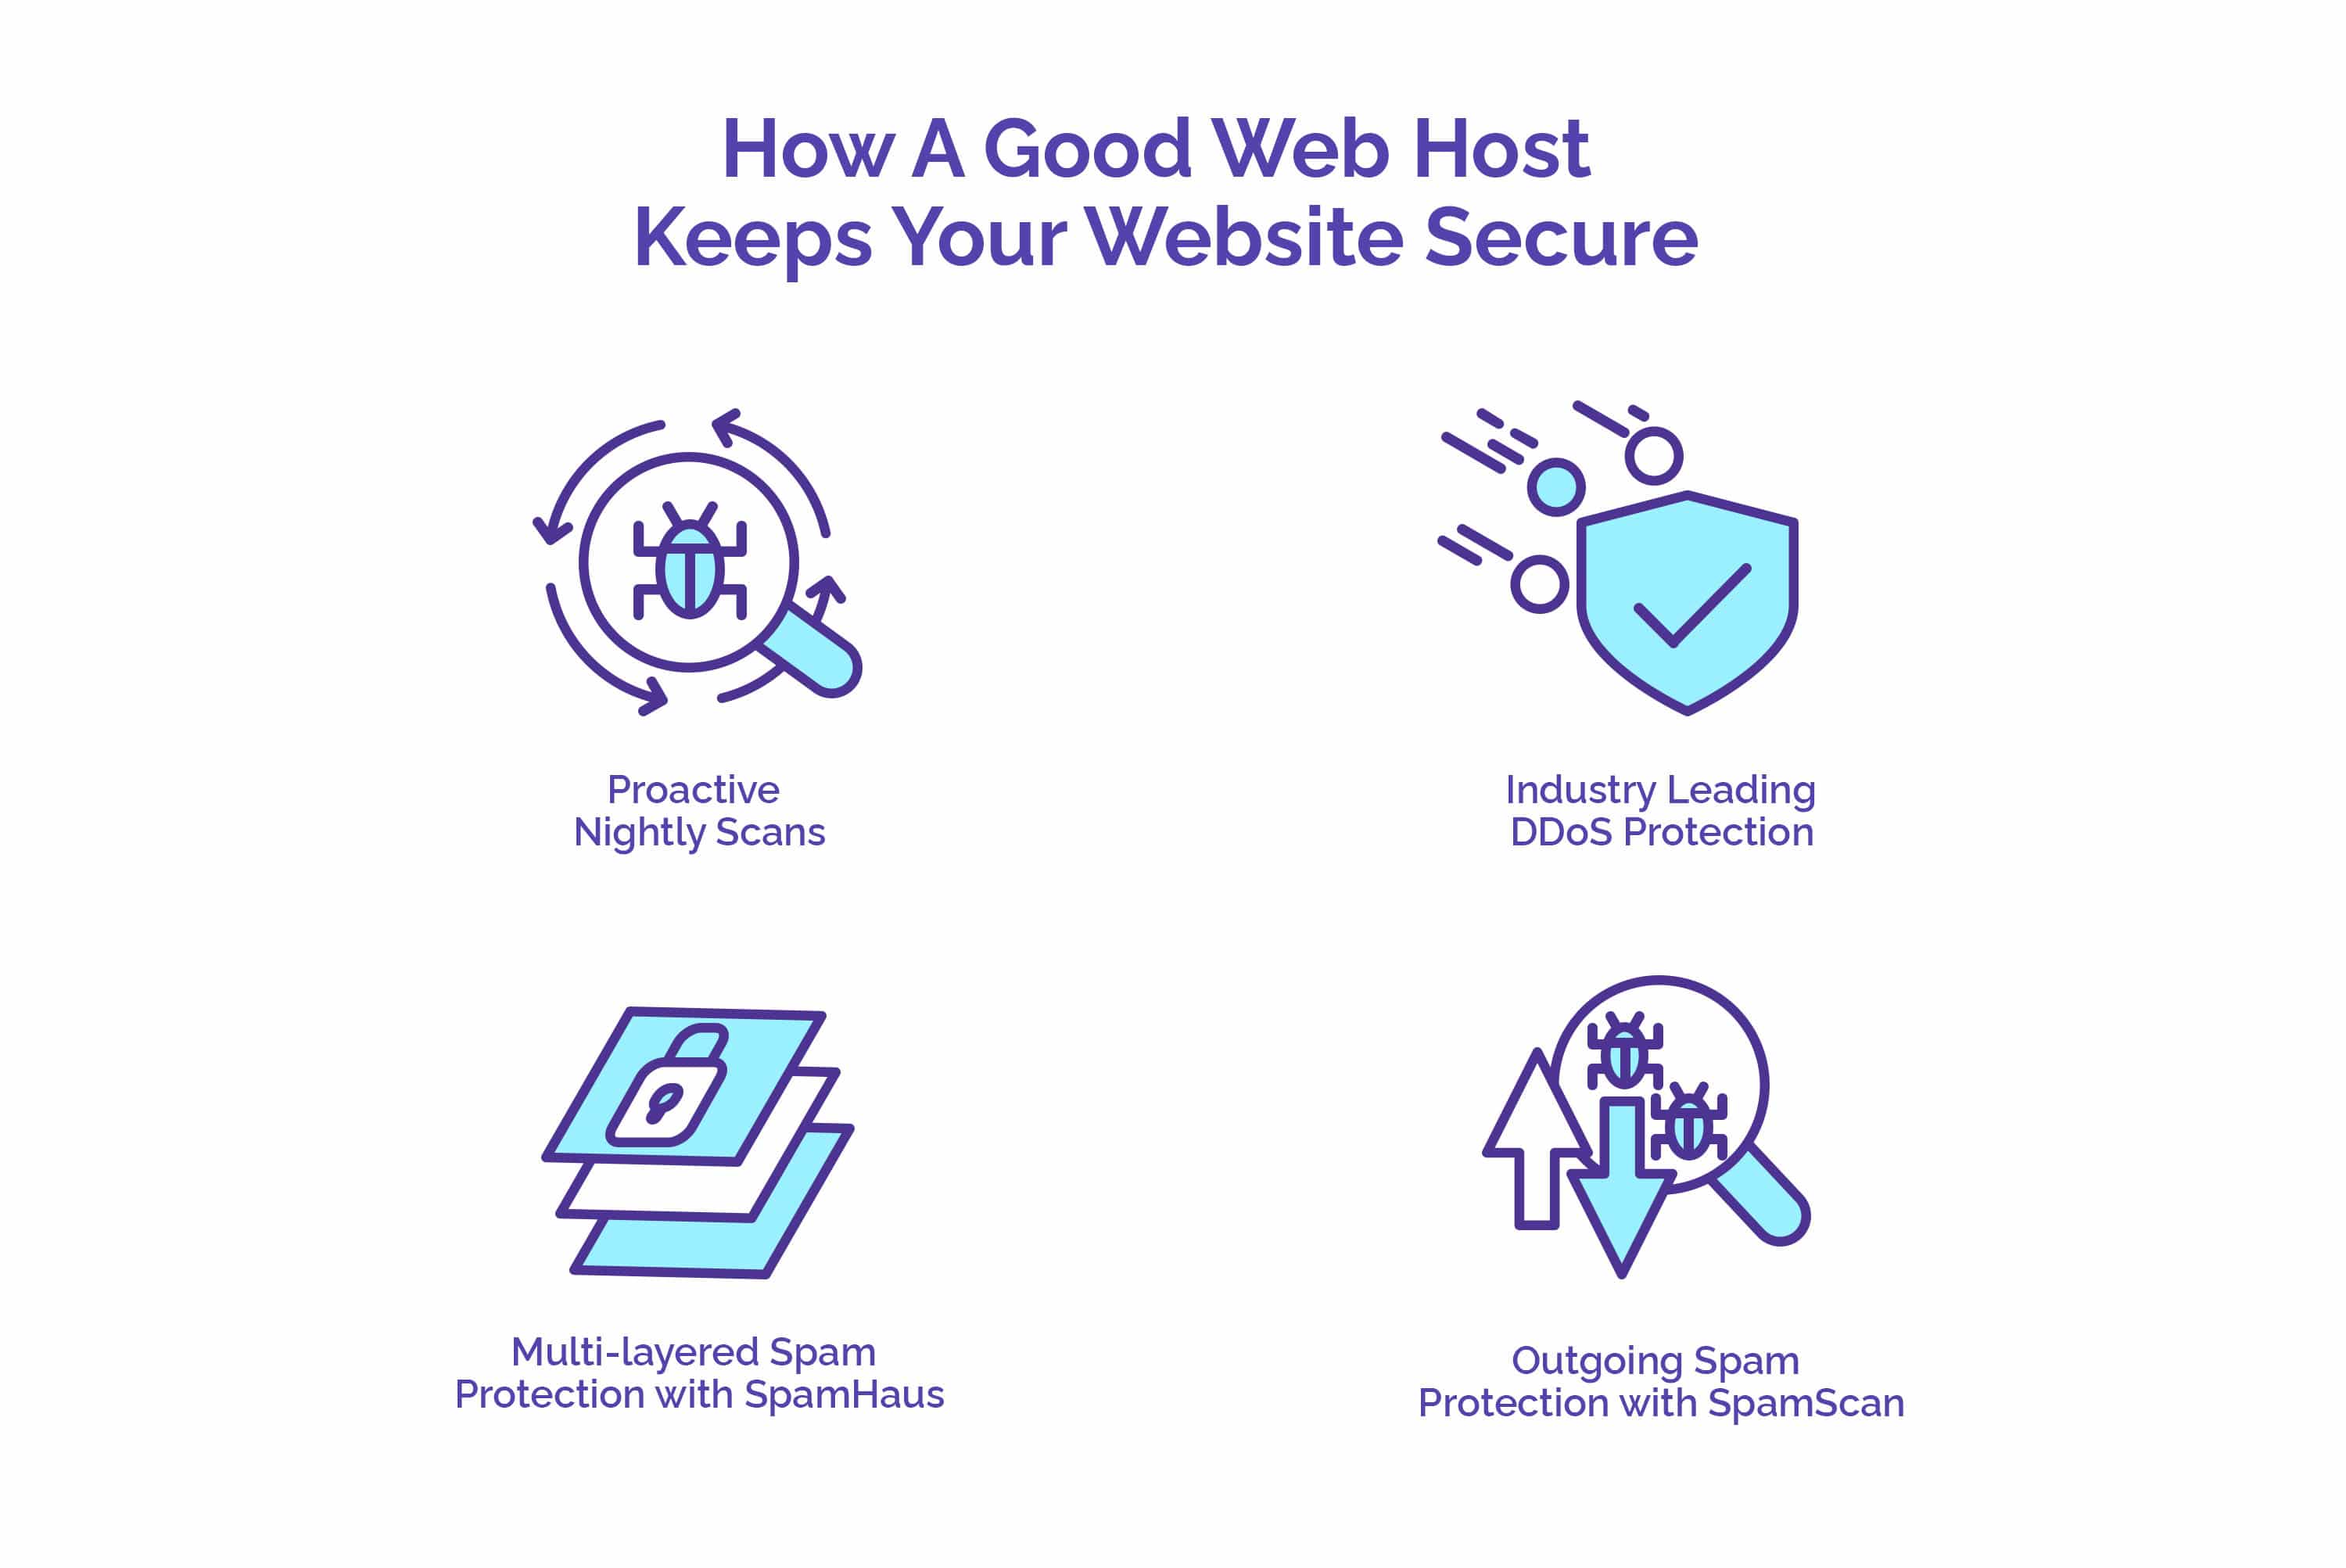 How A Good Web Host Keeps Your Website Secure